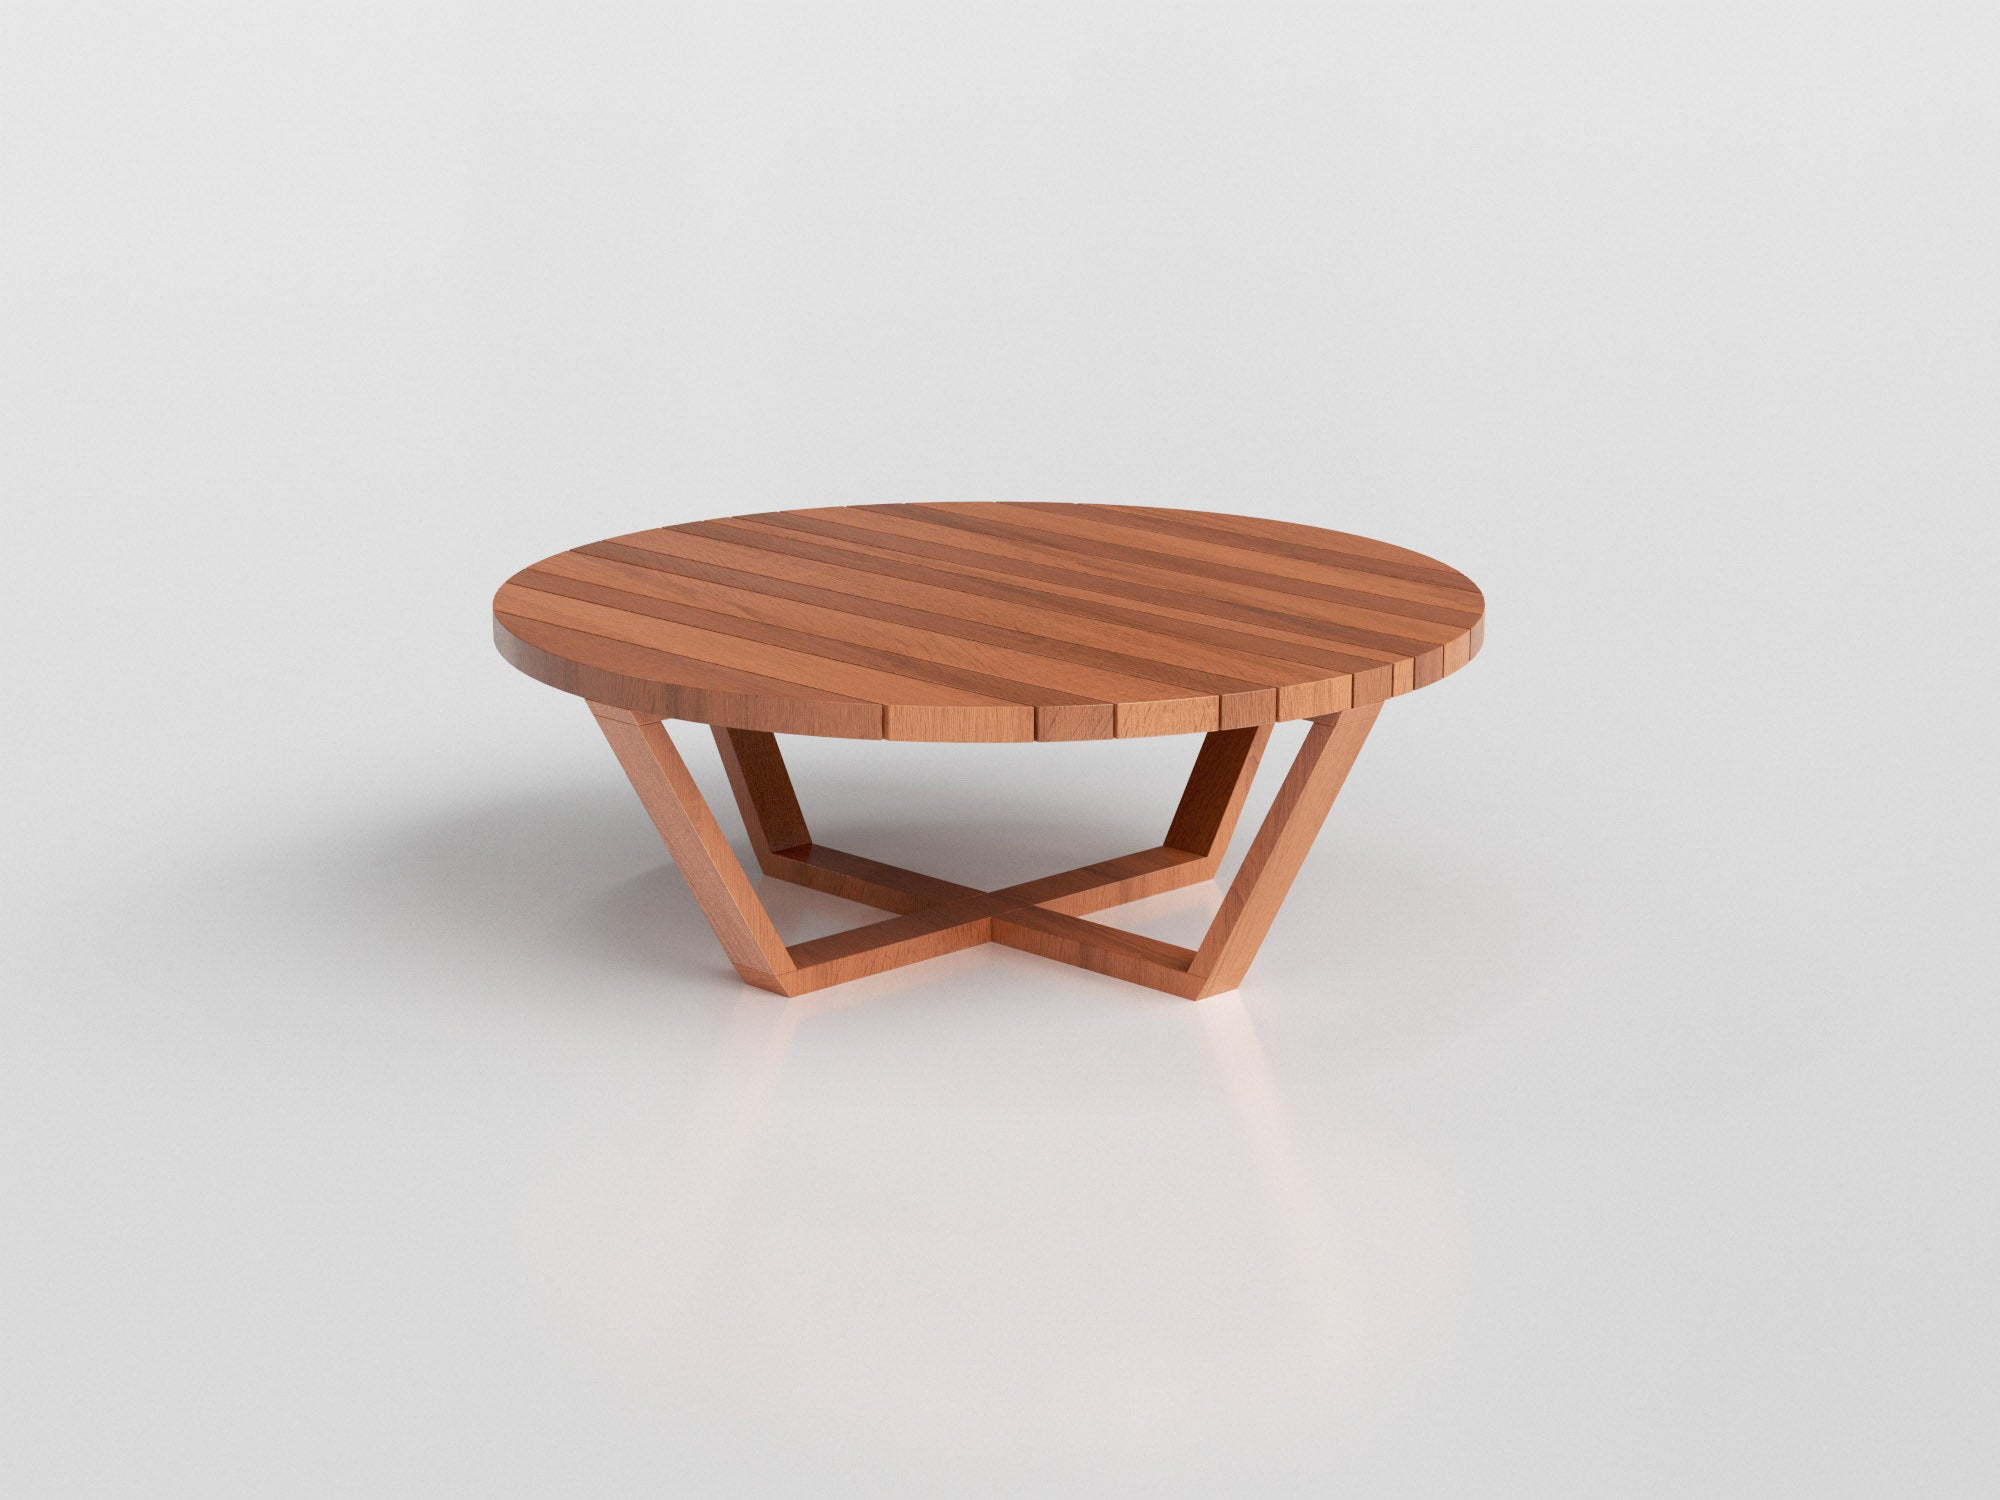 Fusion Round Coffee Table Compact with wood estruture and top for outdoor areas, designed by Maria Candida Machado